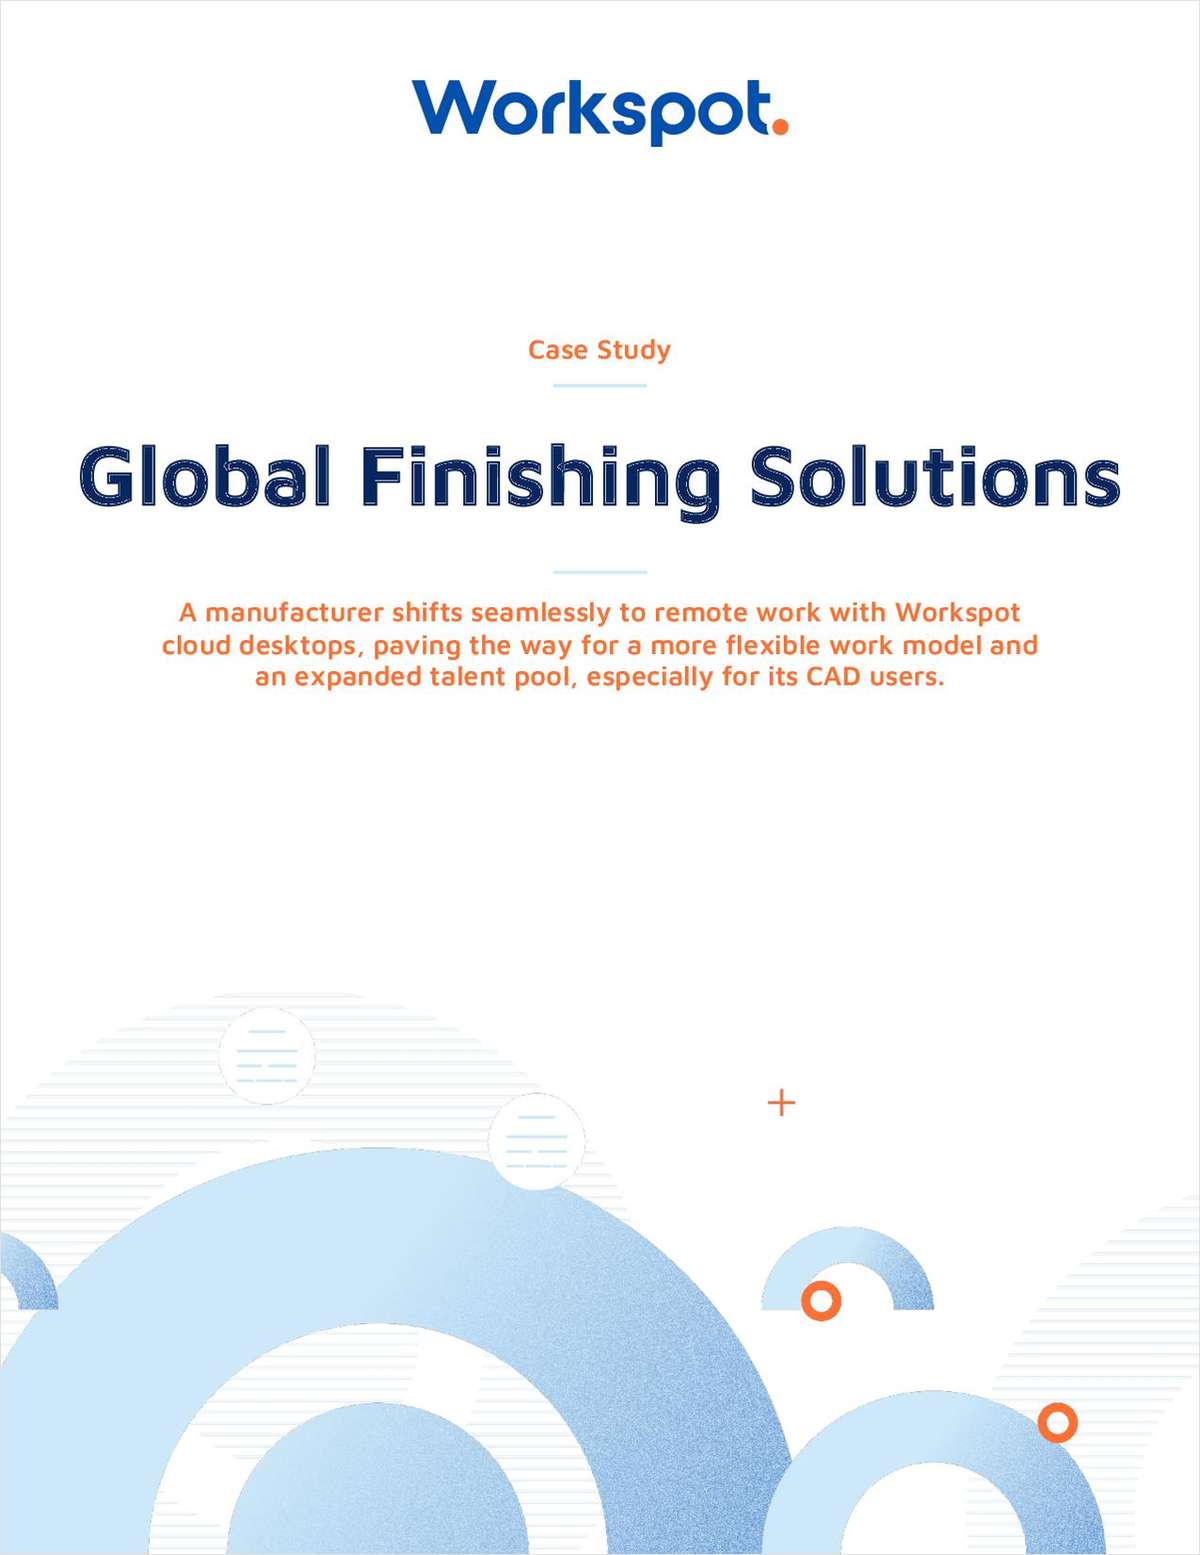 Global Finishing Made the Shift from a VPN to Workspot Cloud PCs